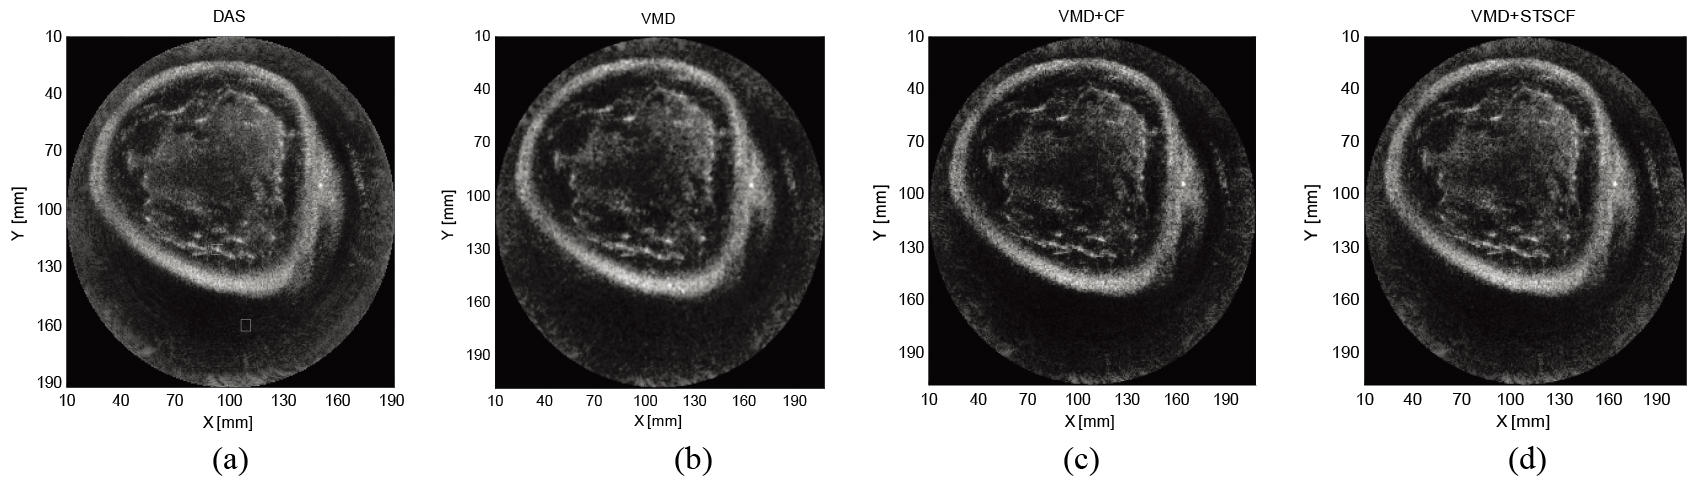 Reconstructed images of female volunteer breast by (a) DAS; (b) VMD; (c) VMD+CF; (d) VMD+STSCF.